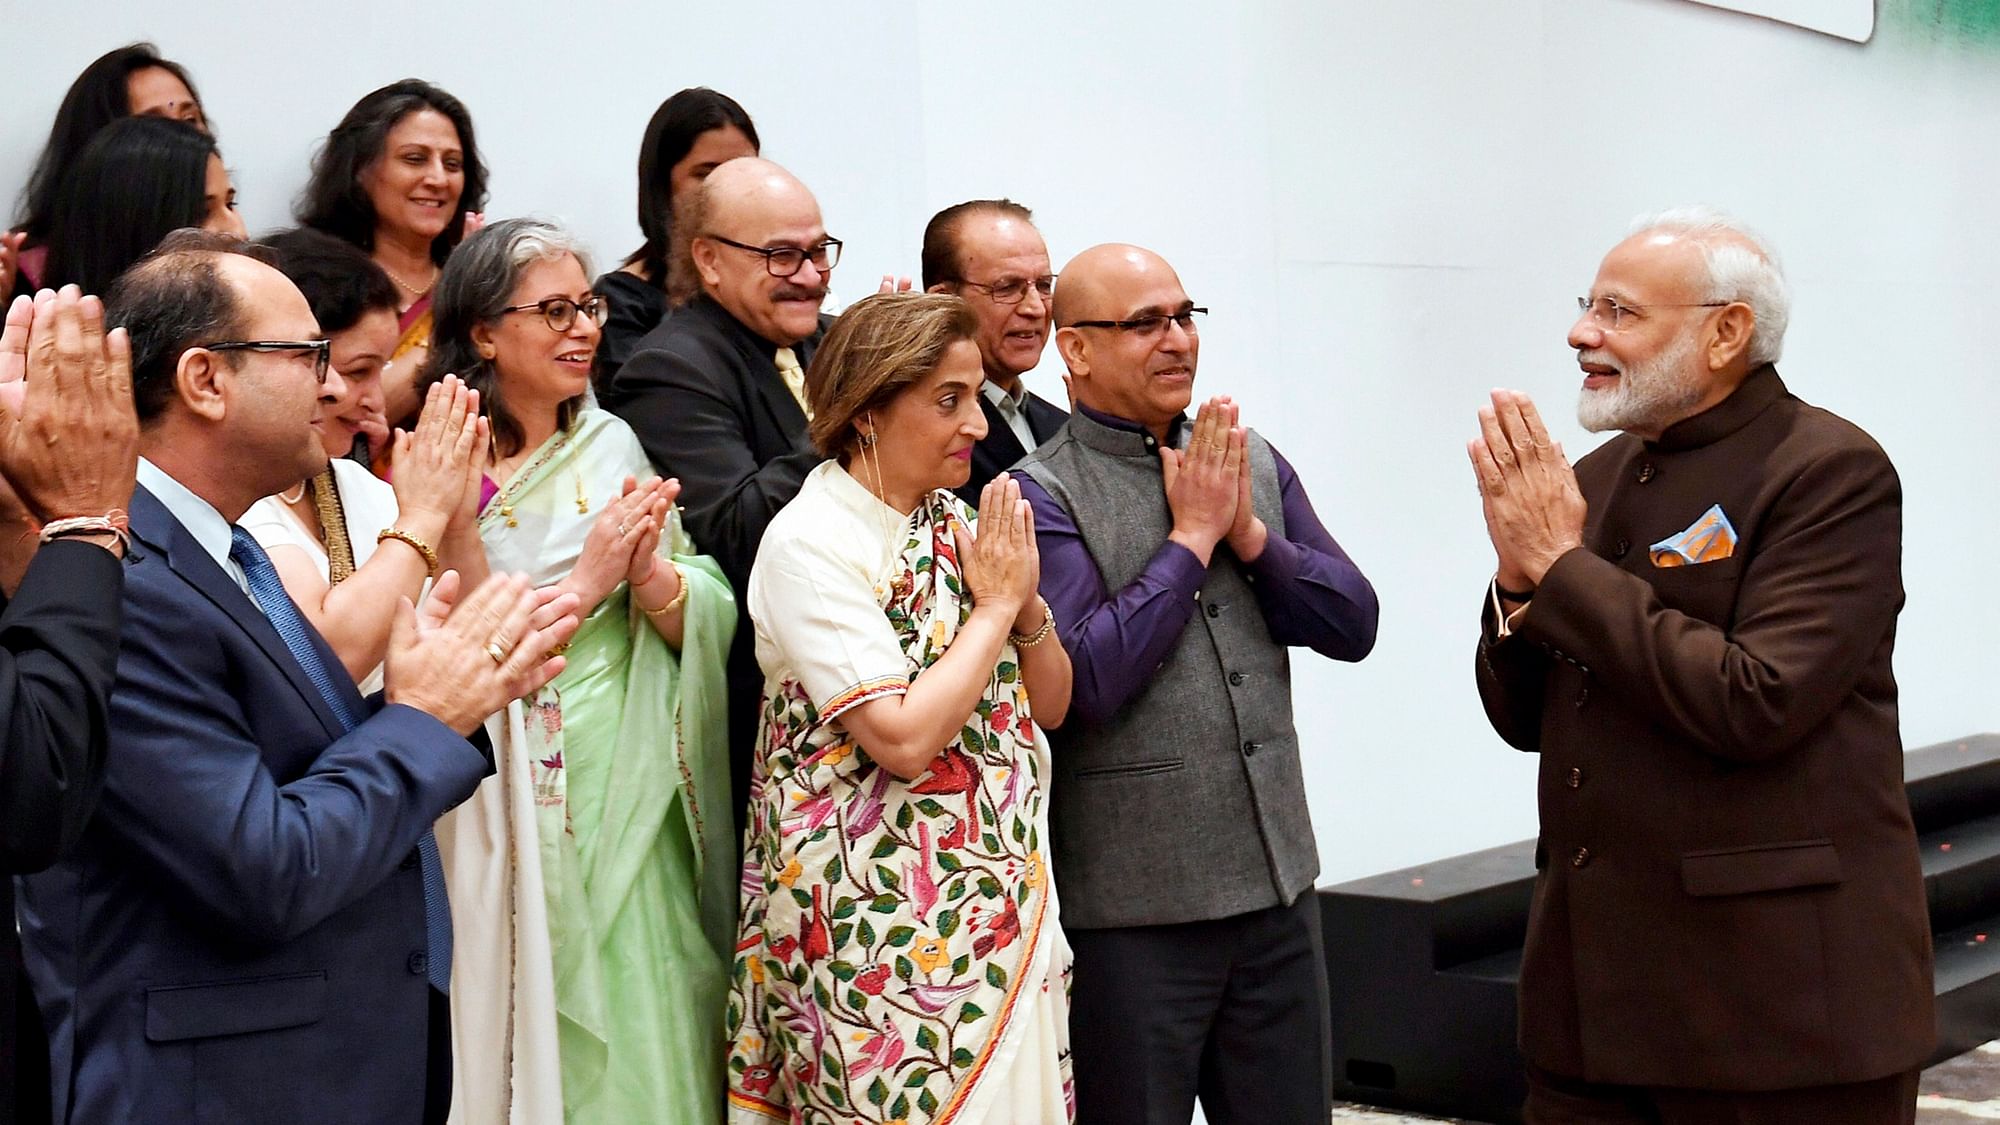 Prime Minister Narendra Modi exchanged greetings with a delegation of Kashmiri Pandits during an interaction with the Indian community in Houston.